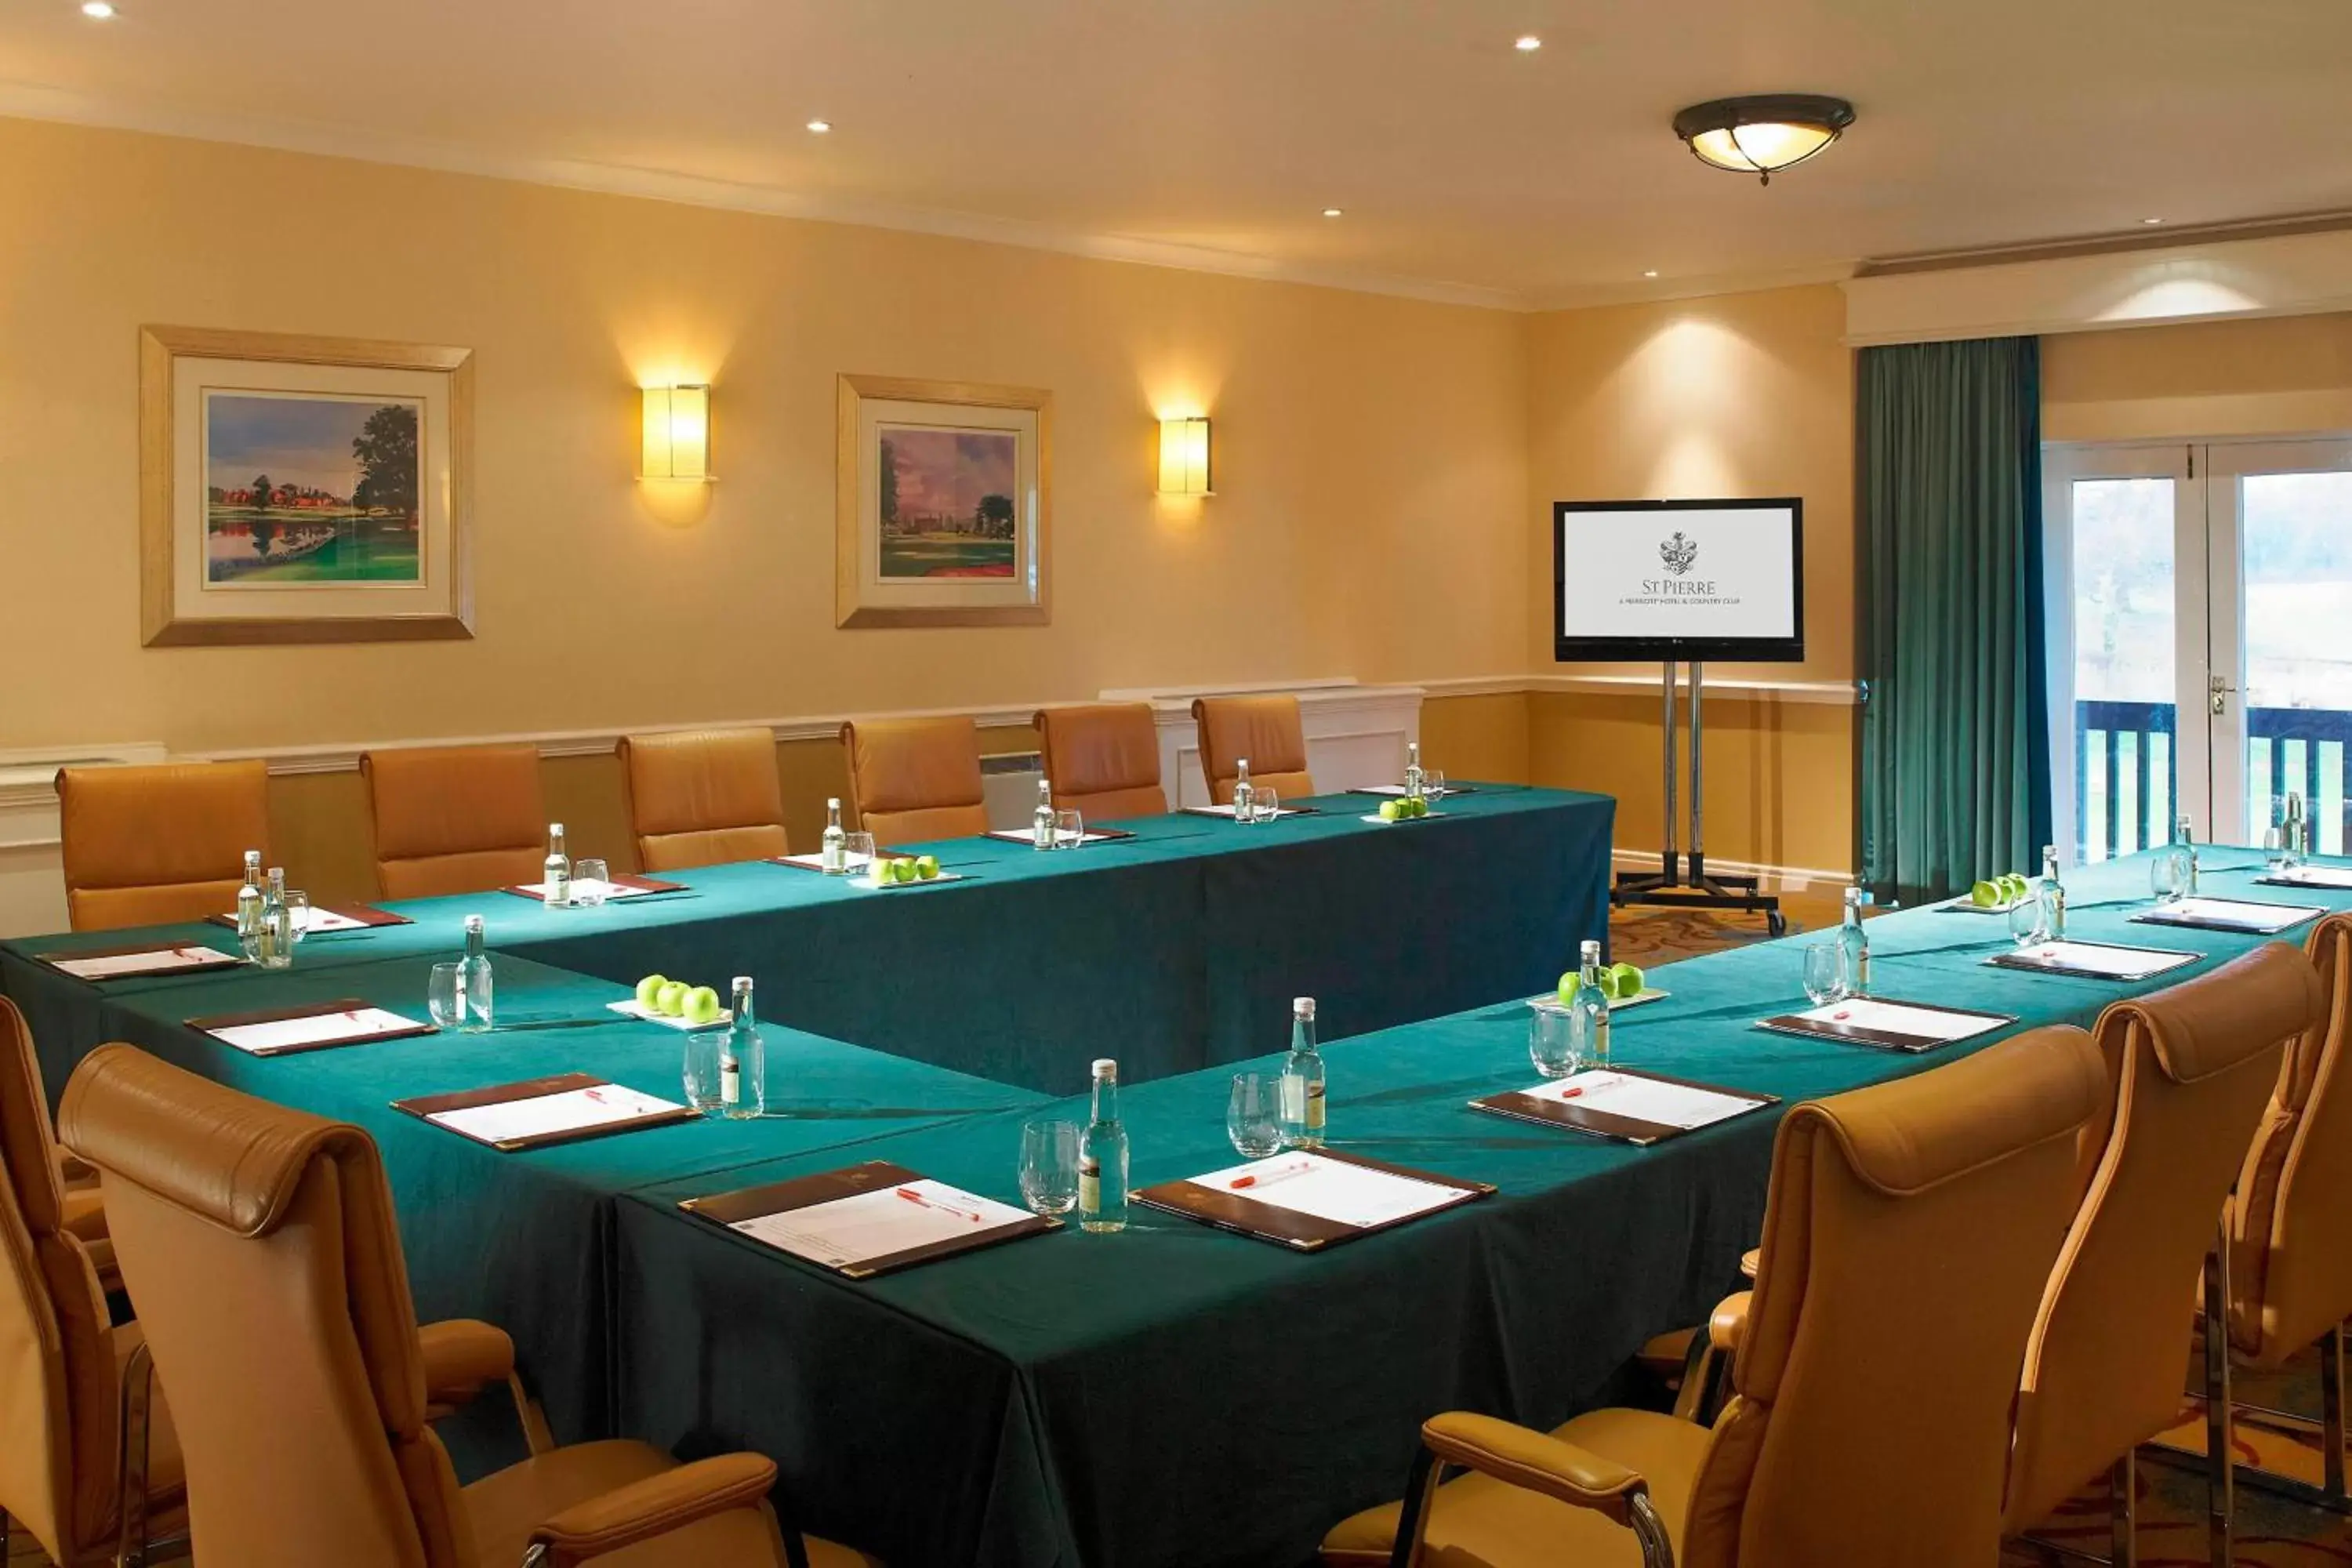 Meeting/conference room in Delta Hotels by Marriott St Pierre Country Club